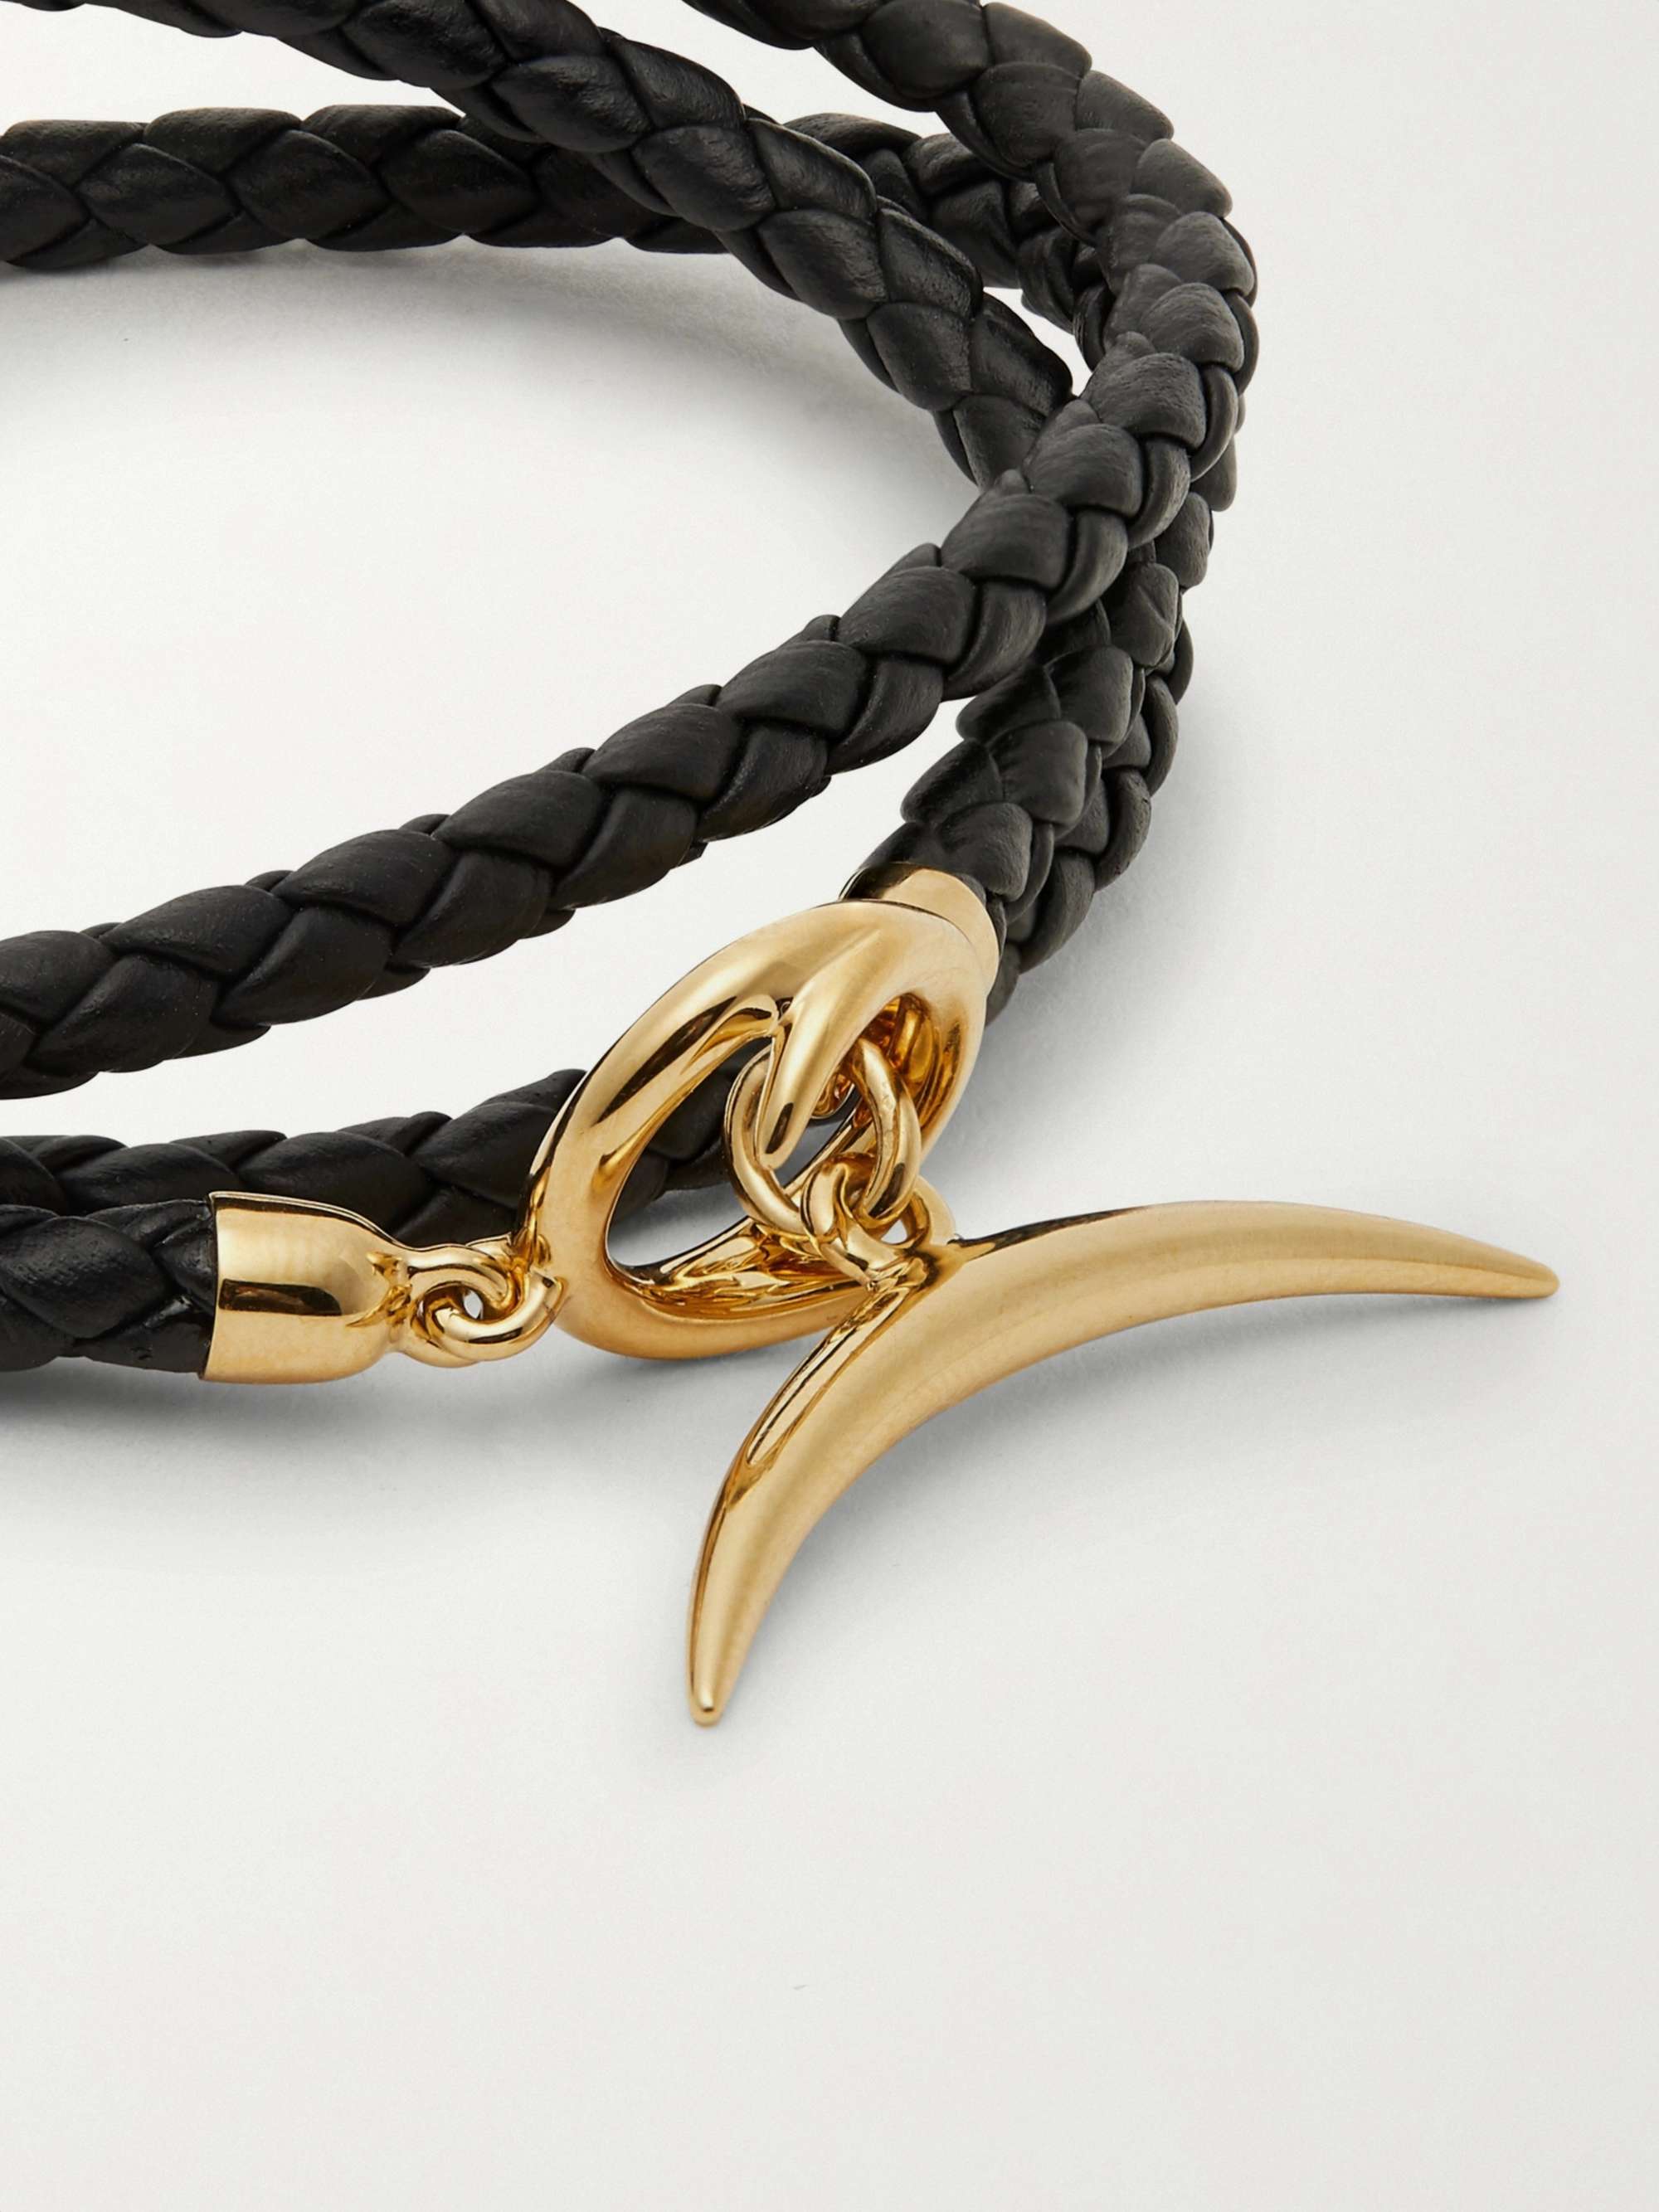 SHAUN LEANE Quill Woven Leather and Gold-Plated Wrap Bracelet | MR PORTER